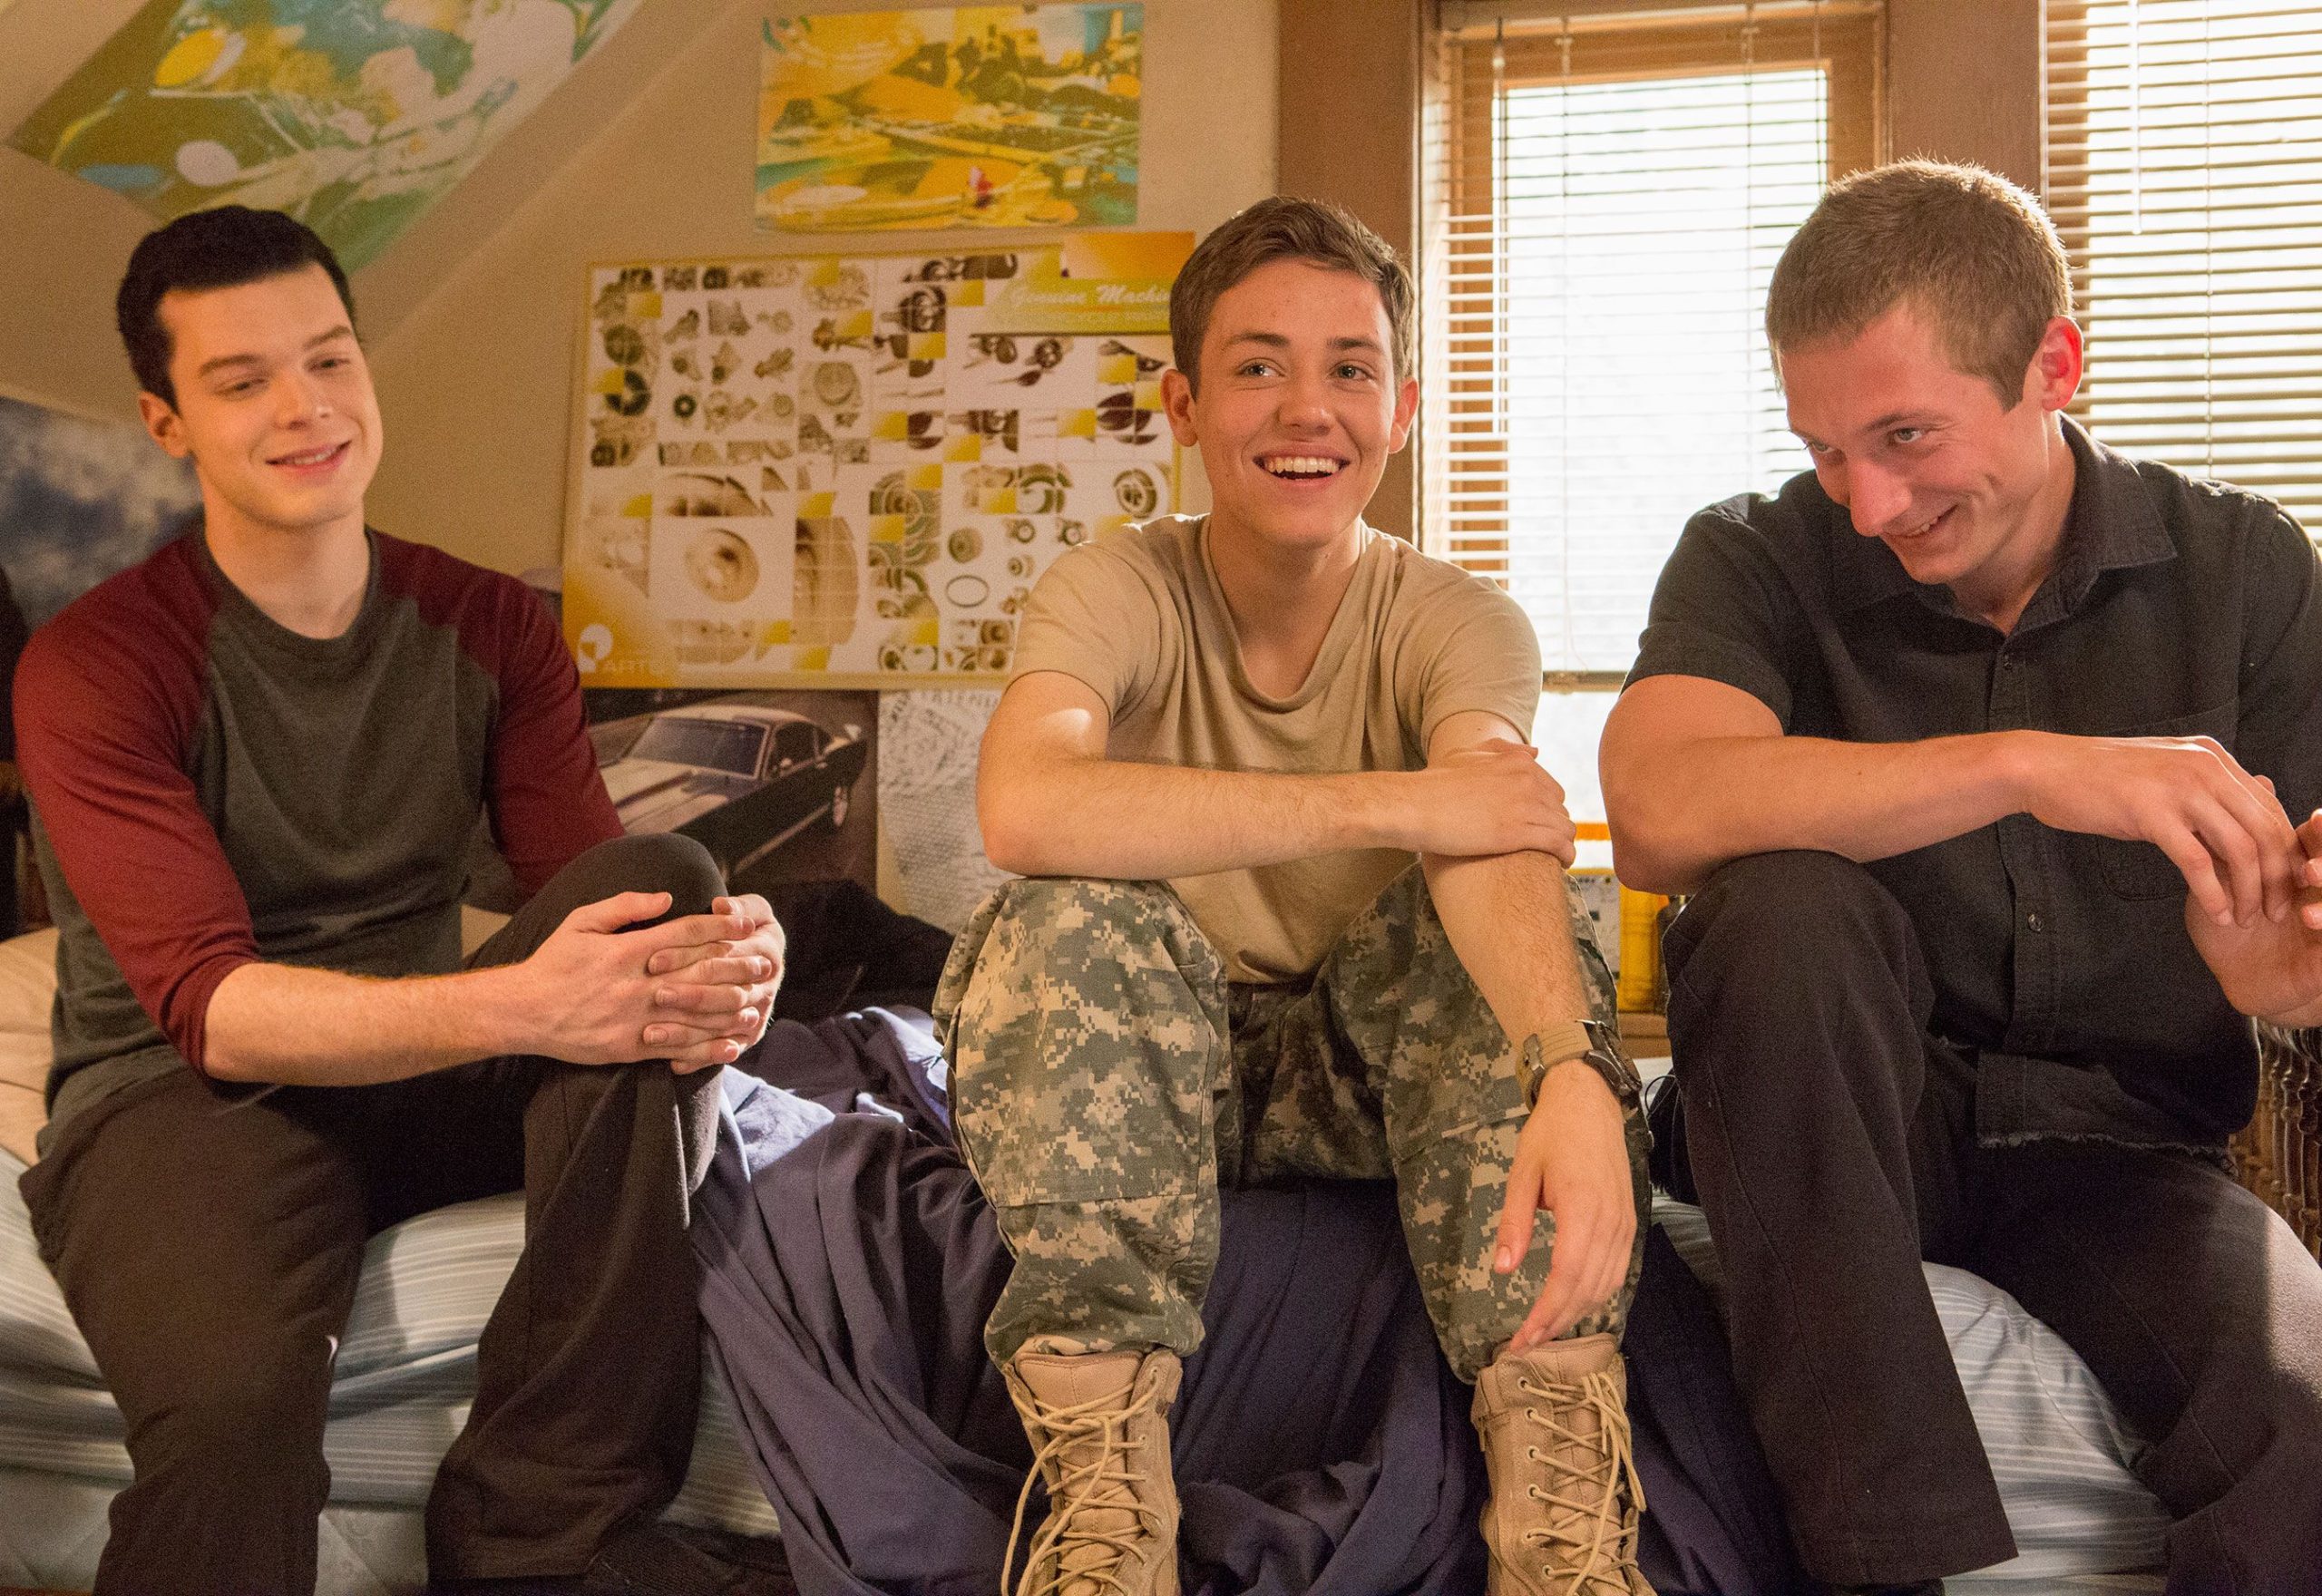 Carl Gallagher, Ian Gallagher, and Lip Gallagher sitting in their room laughing.